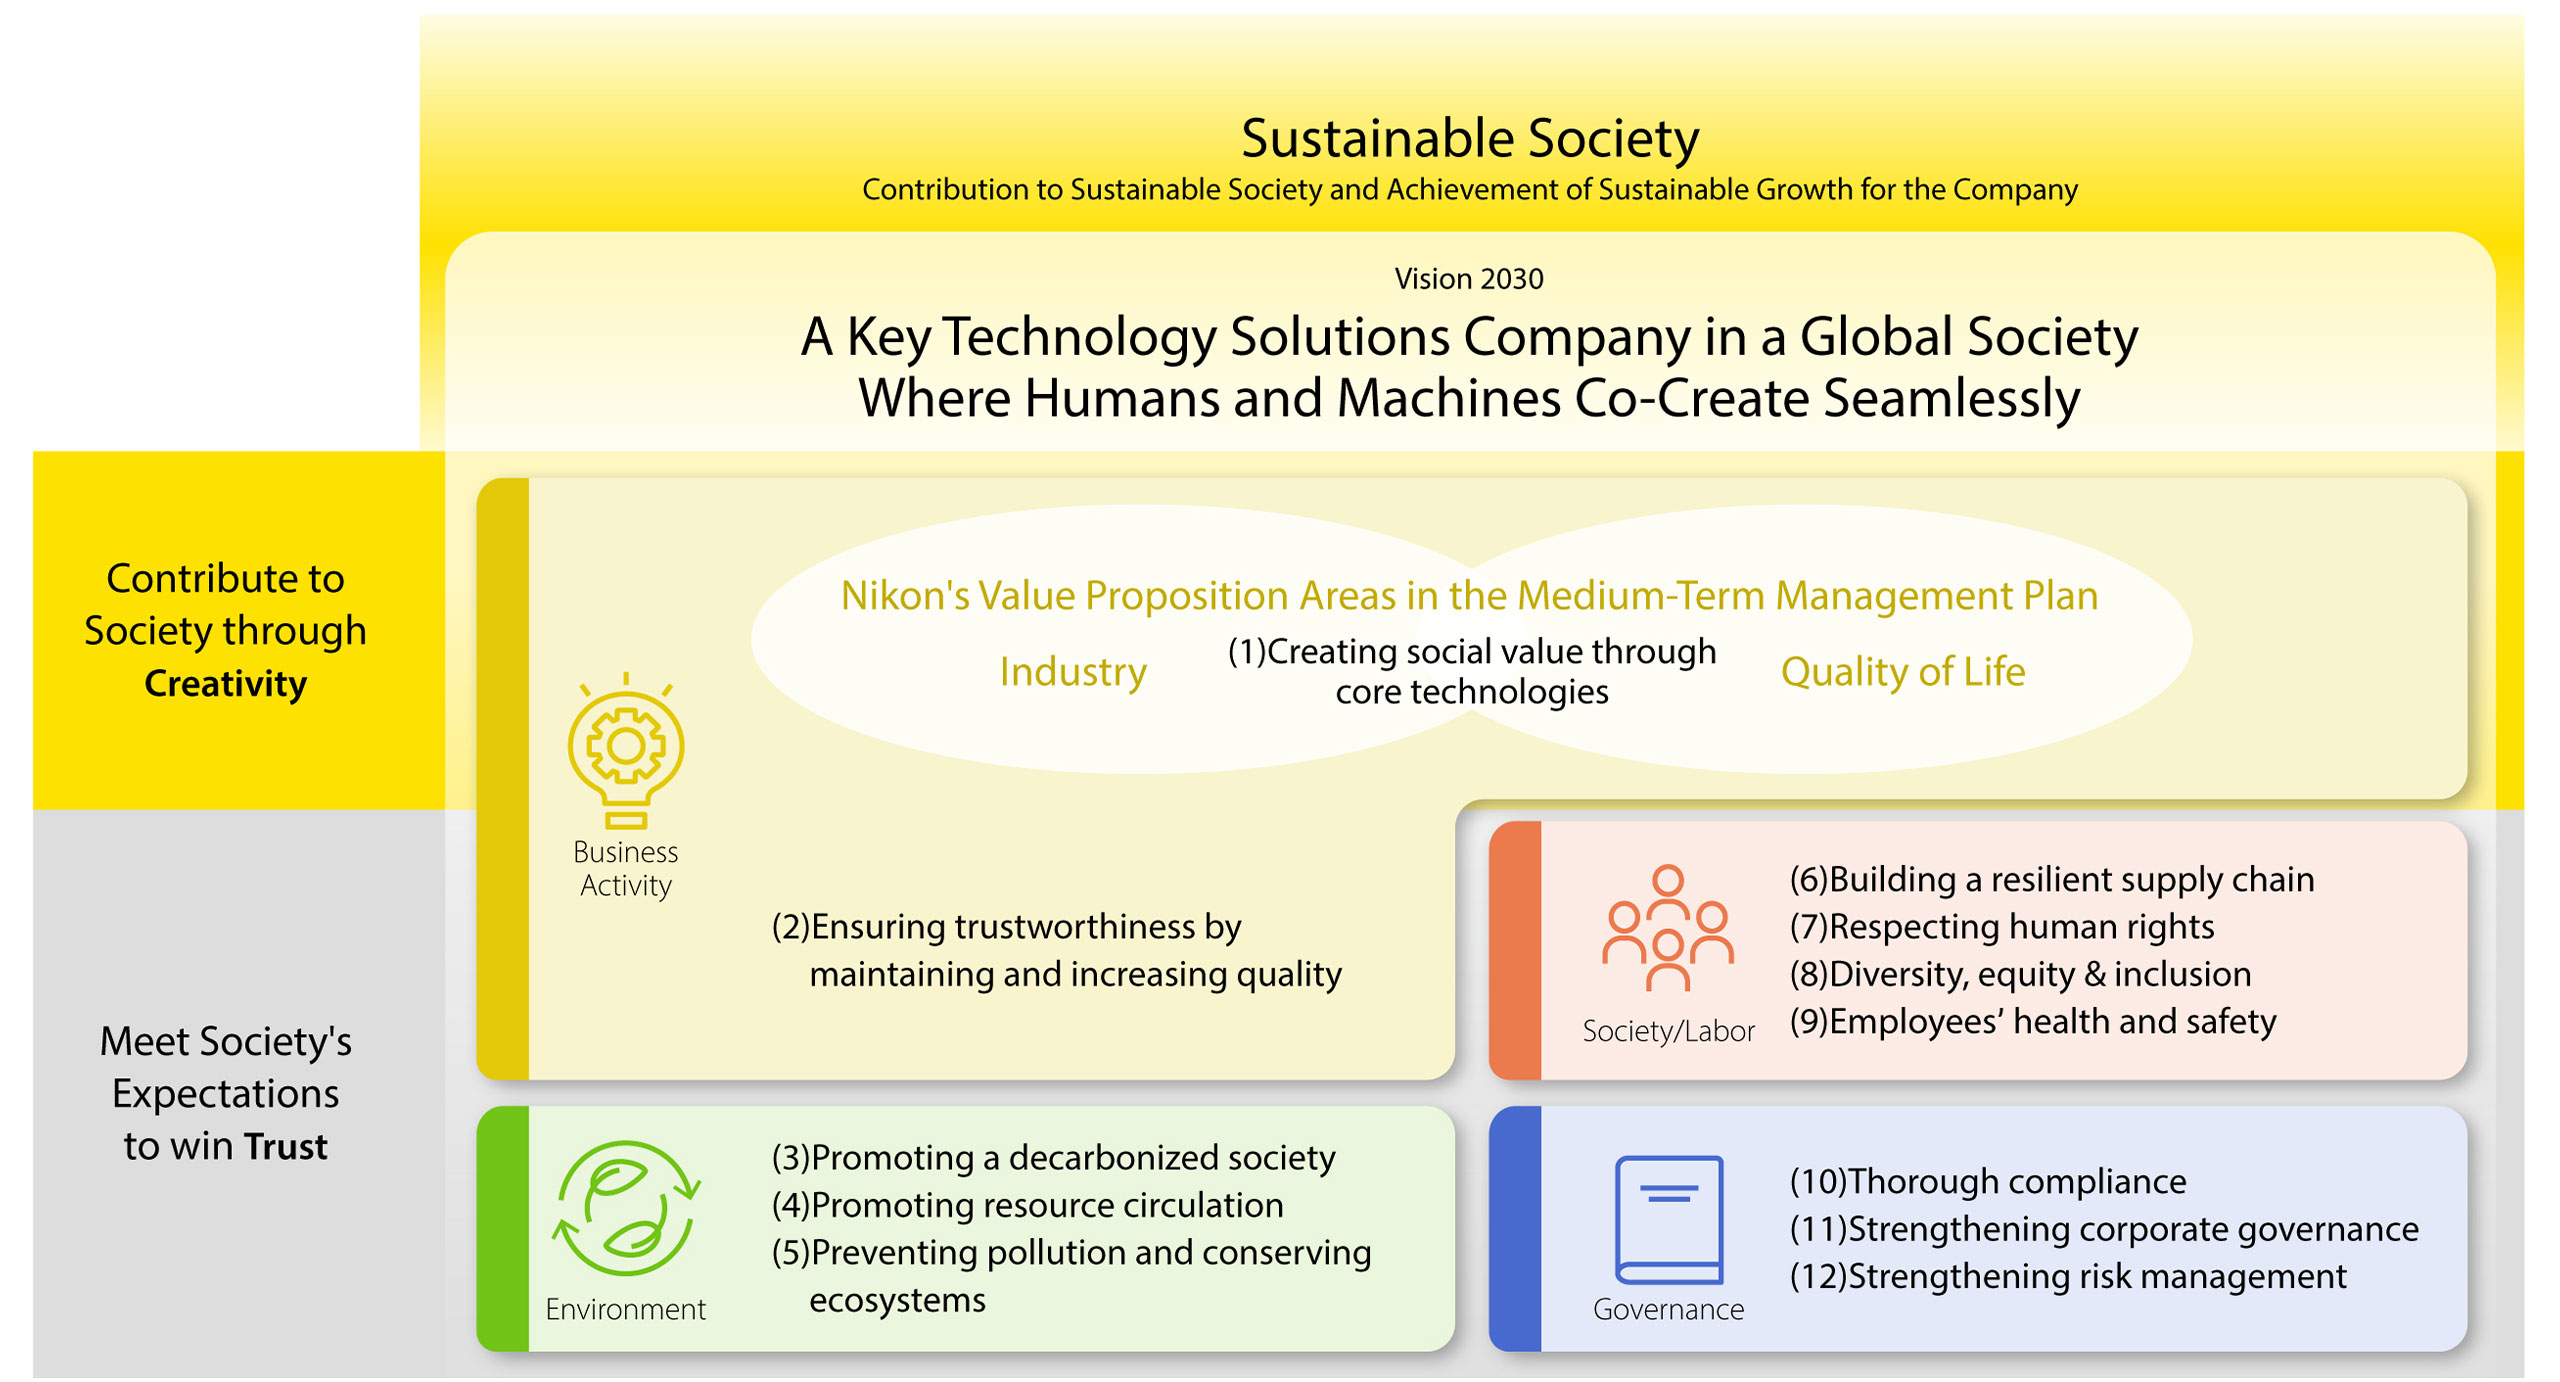 Sustainable Society Contribution to Sustainable Society and Achievement of Sustainable Growth for the Company / Vision 2030 A Key Technology Solutions Company in a Global Society Where Humans and Machines Co-Create Seamlessly / Contribute to Society through Creativity / Meet Society's Expectations to win Trust / Business Activity : Areas Where Nikon Deliver Value in the Medium-Term Management Plan / Industry / (1)Creating Social Value Through Core Technologies / Quality of Life / (2)Ensuring trustworthiness by maintaining and increasing quality / Environment: (3)Promoting a decarbonized society / (4)Promoting resource circulation / (5)Preventing pollution and conserving ecosystems / Society/Labor: (6)Building a resilient supply chain / (7)Respecting human rights / (8)Diversity, equity & inclusion / (9)Employees' health and safety / Governance: (10)Thorough compliance / (11)Strengthening corporate governance / (12)Strengthening risk management